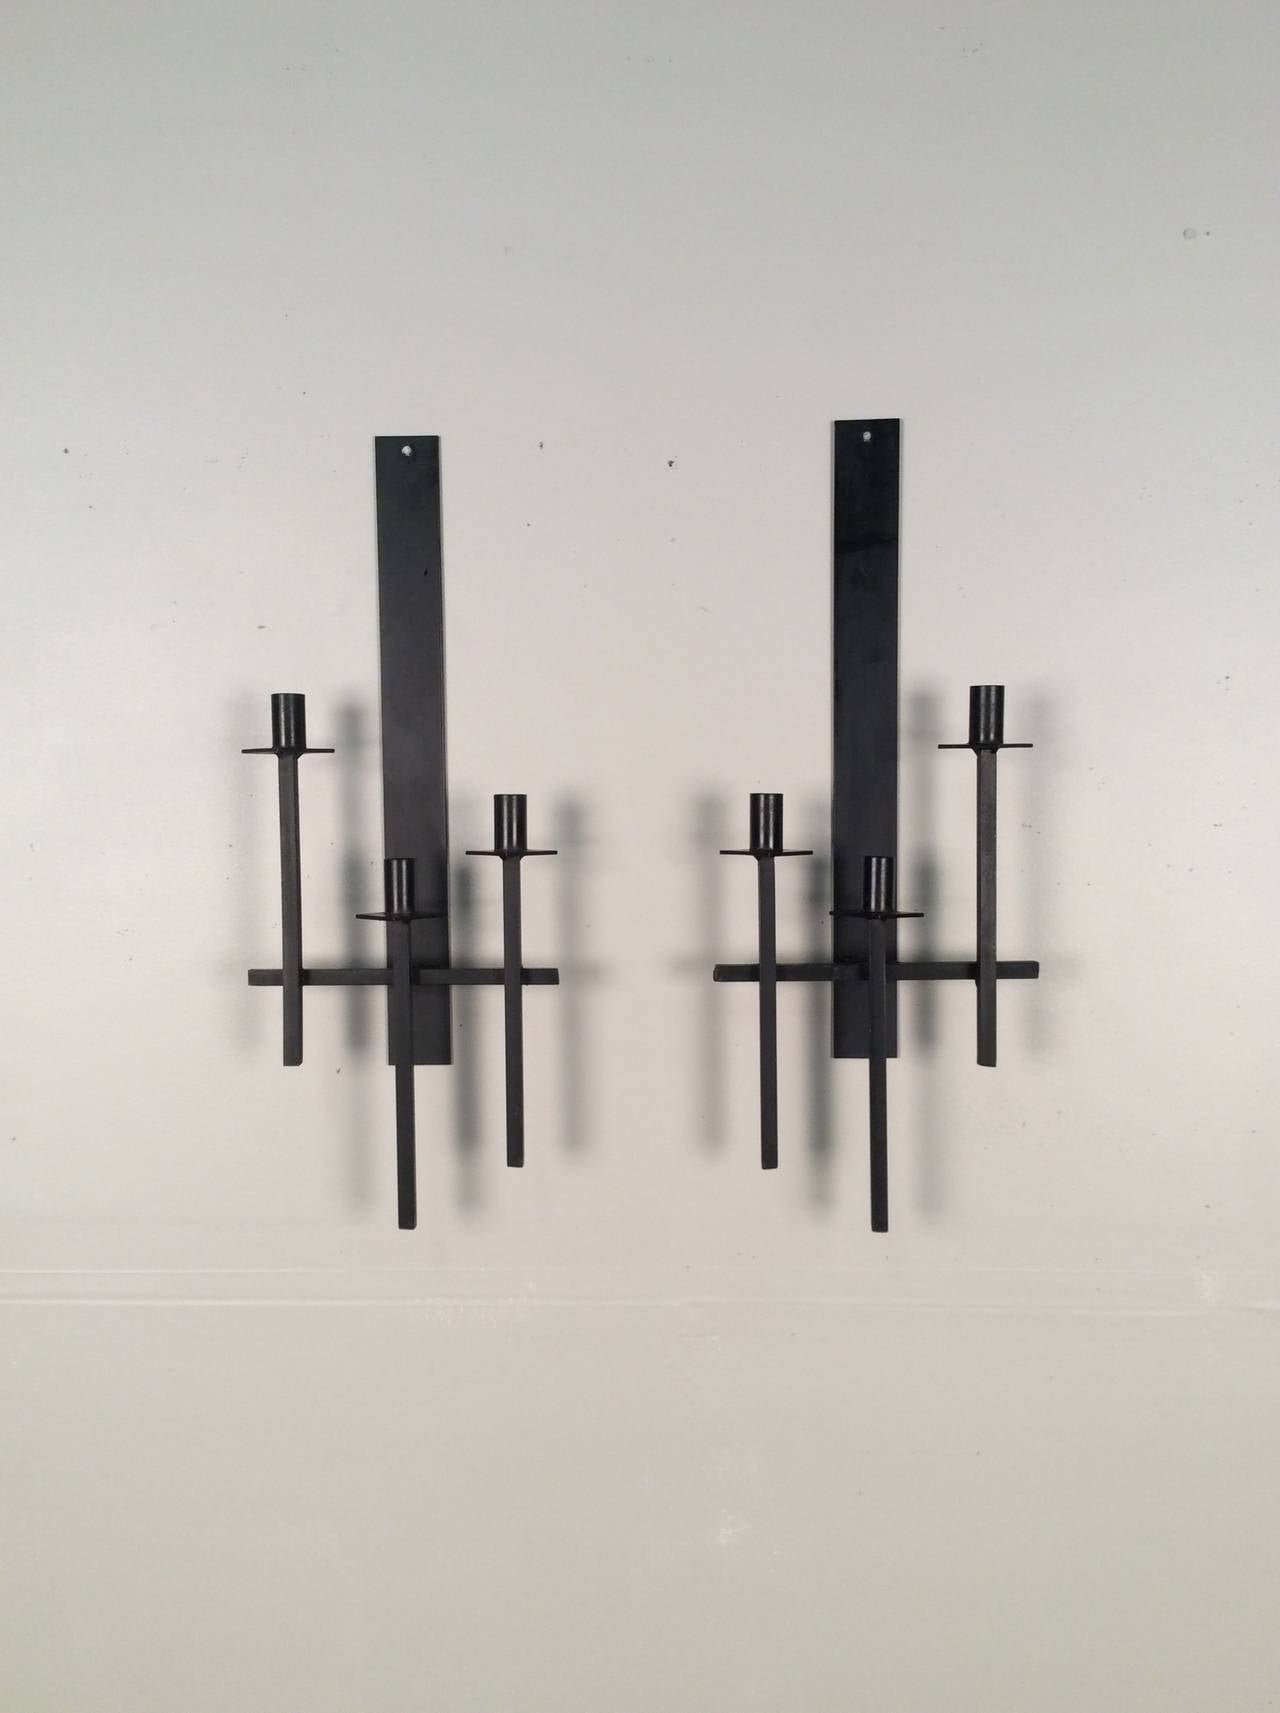 Mid-20th Century Wrought Iron Sconces by California Moderists Van Keppel and Green, circa 1960